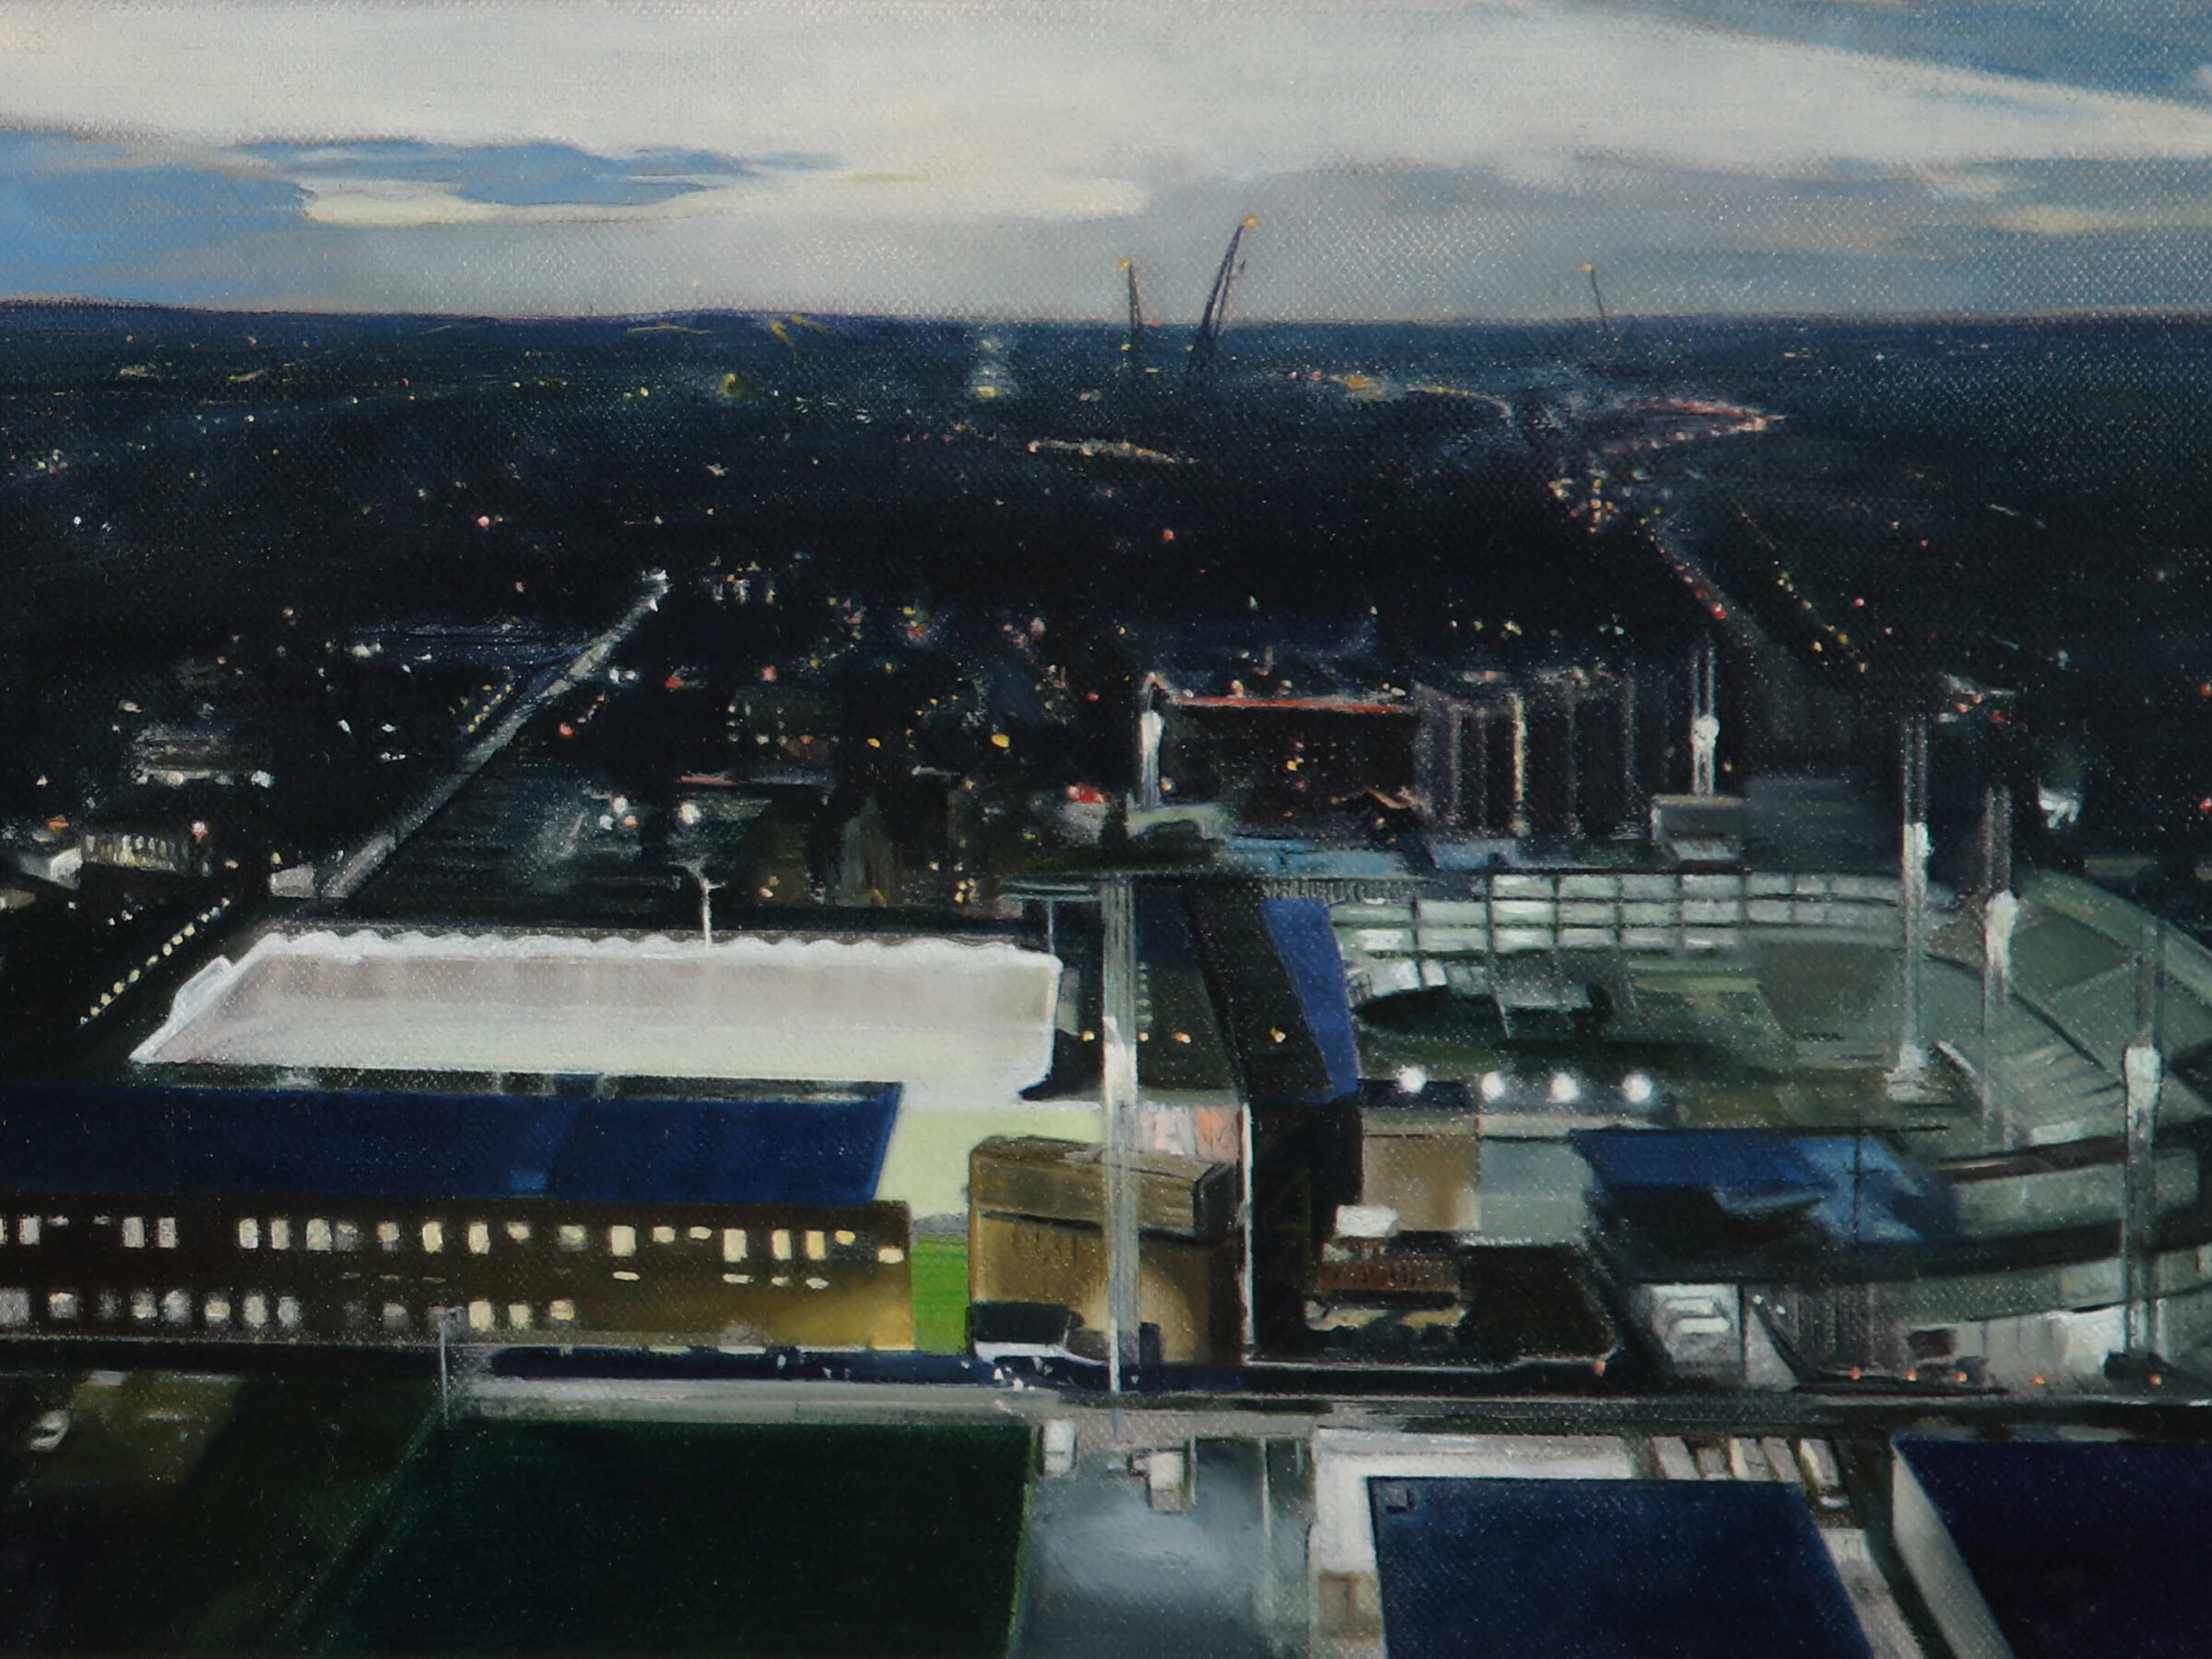 A night like this (at White Hart Lane). Oil/canvas. 22x35 cm.